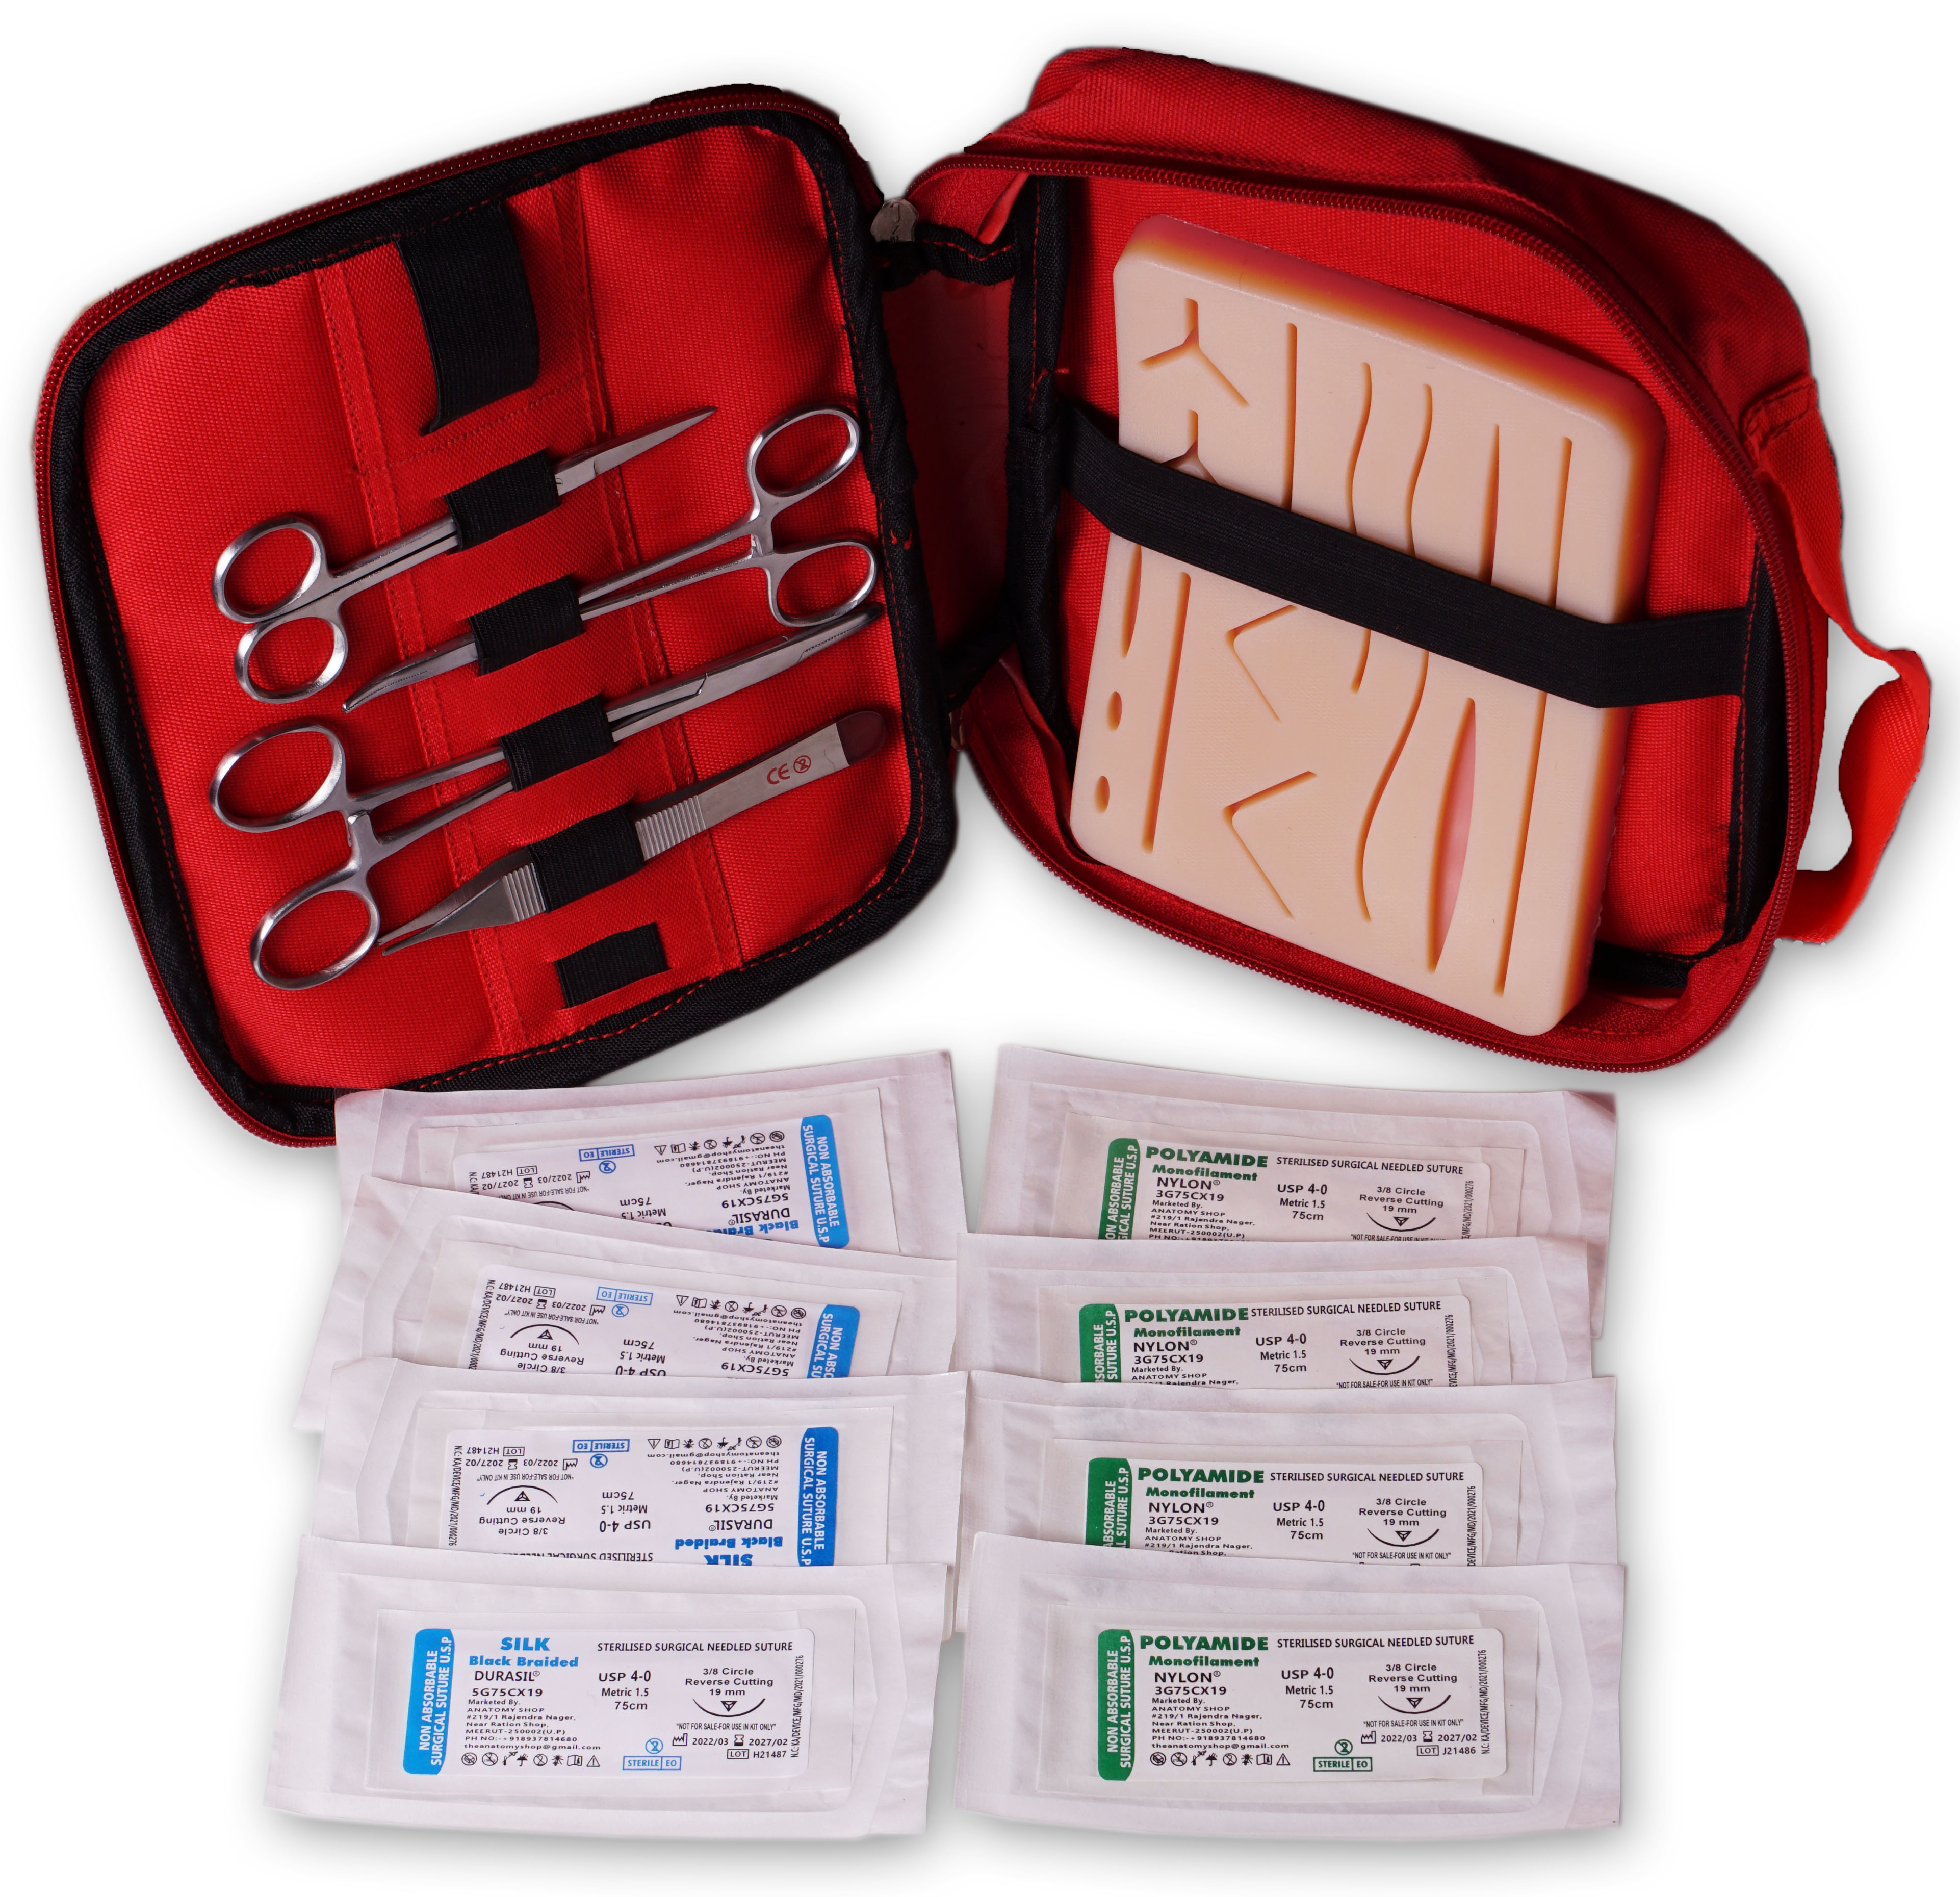 50 Pc Complete Suture Practice Surgical Training Kit for Medical and V –  A2ZSCILAB